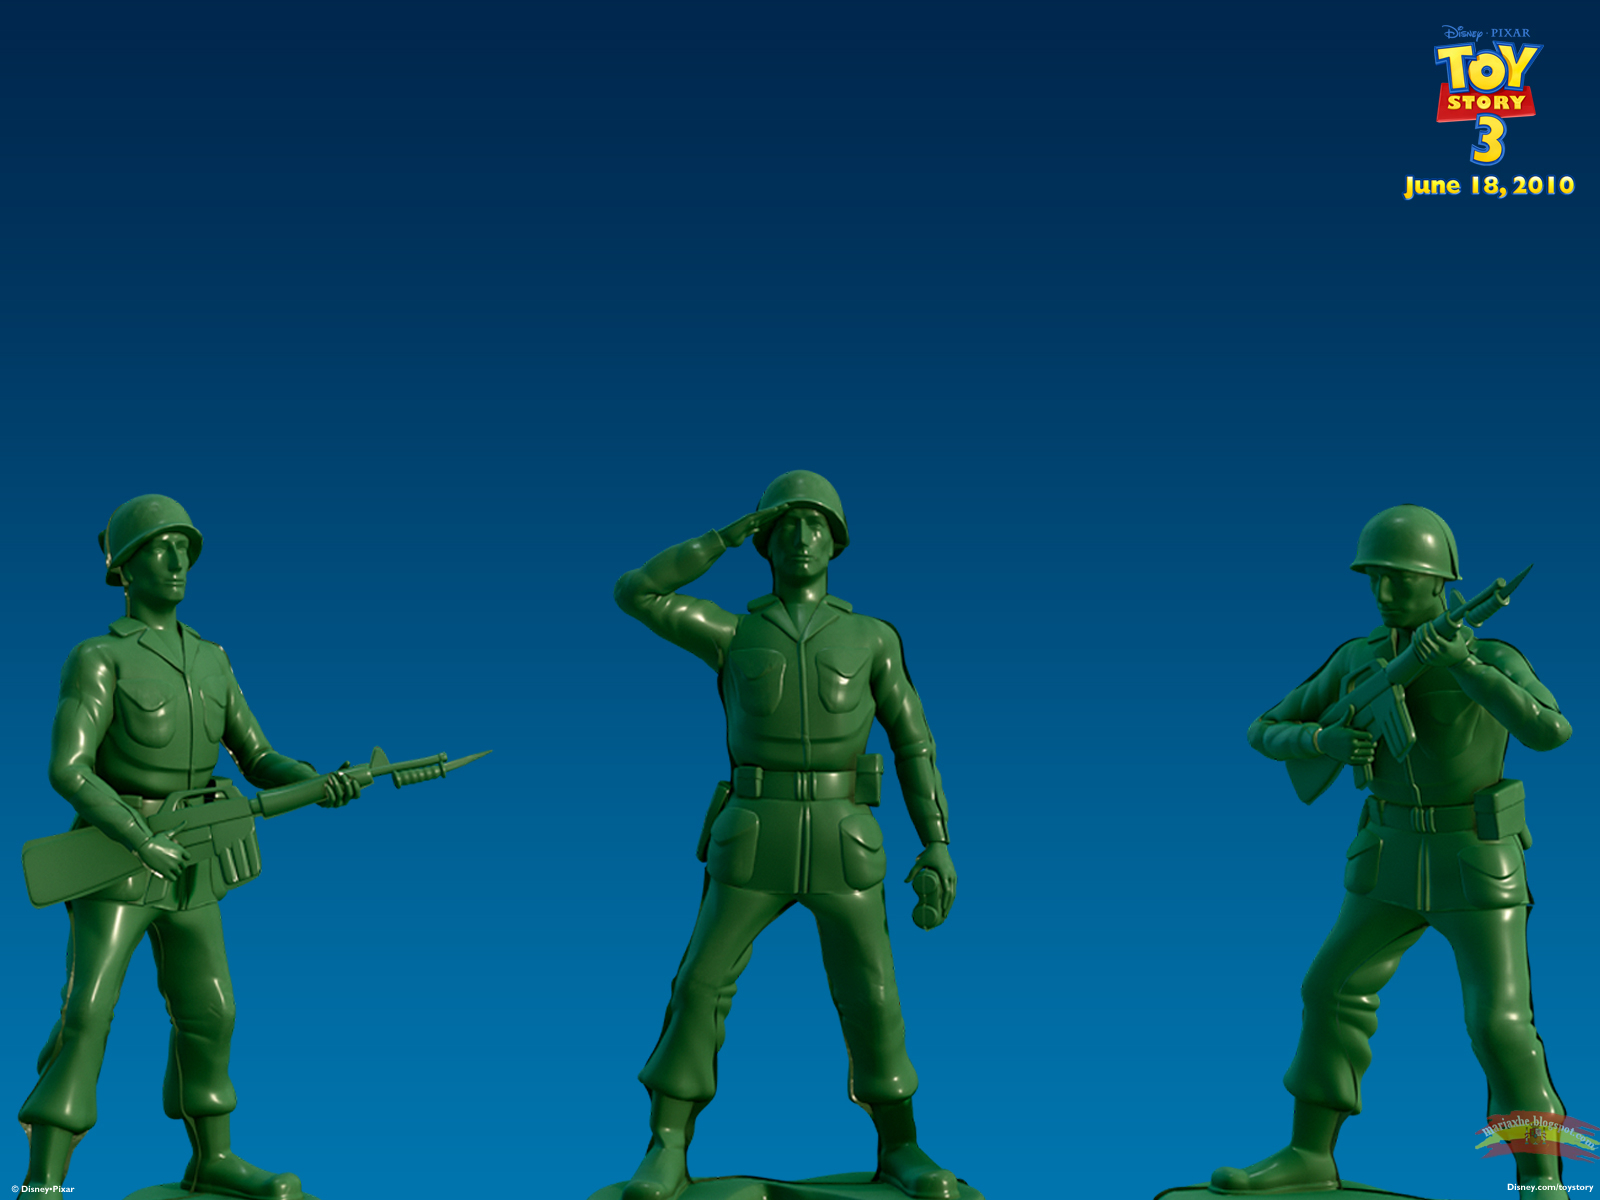 What is the origin of the plastic army men toys?